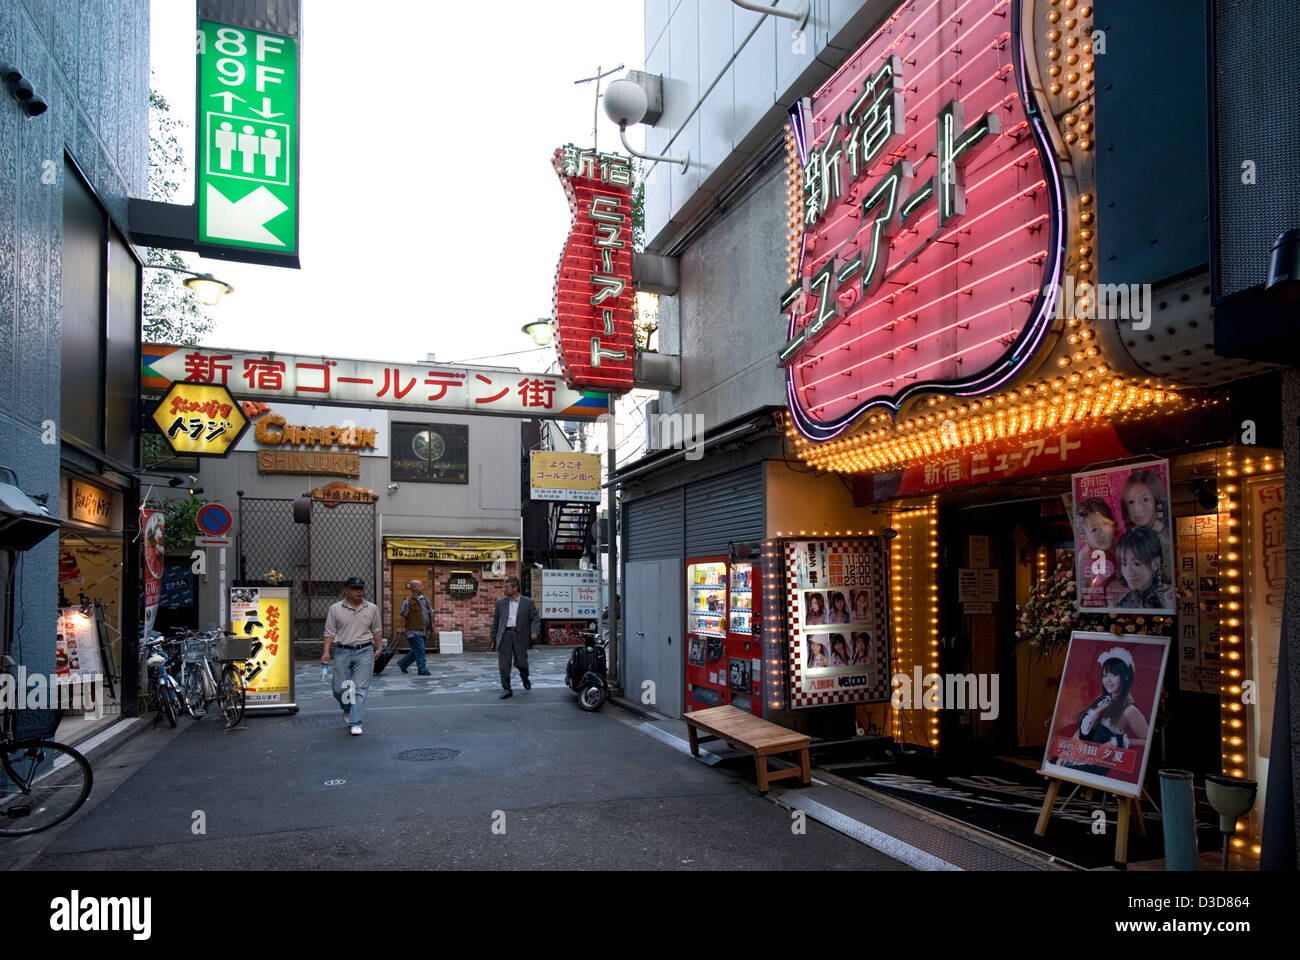 A strip club at entry to Shinjuku Golden-Gai, a backstreet area of bygone-era bars, pubs and eateries from the 1950's in Tokyo. Stock Photo